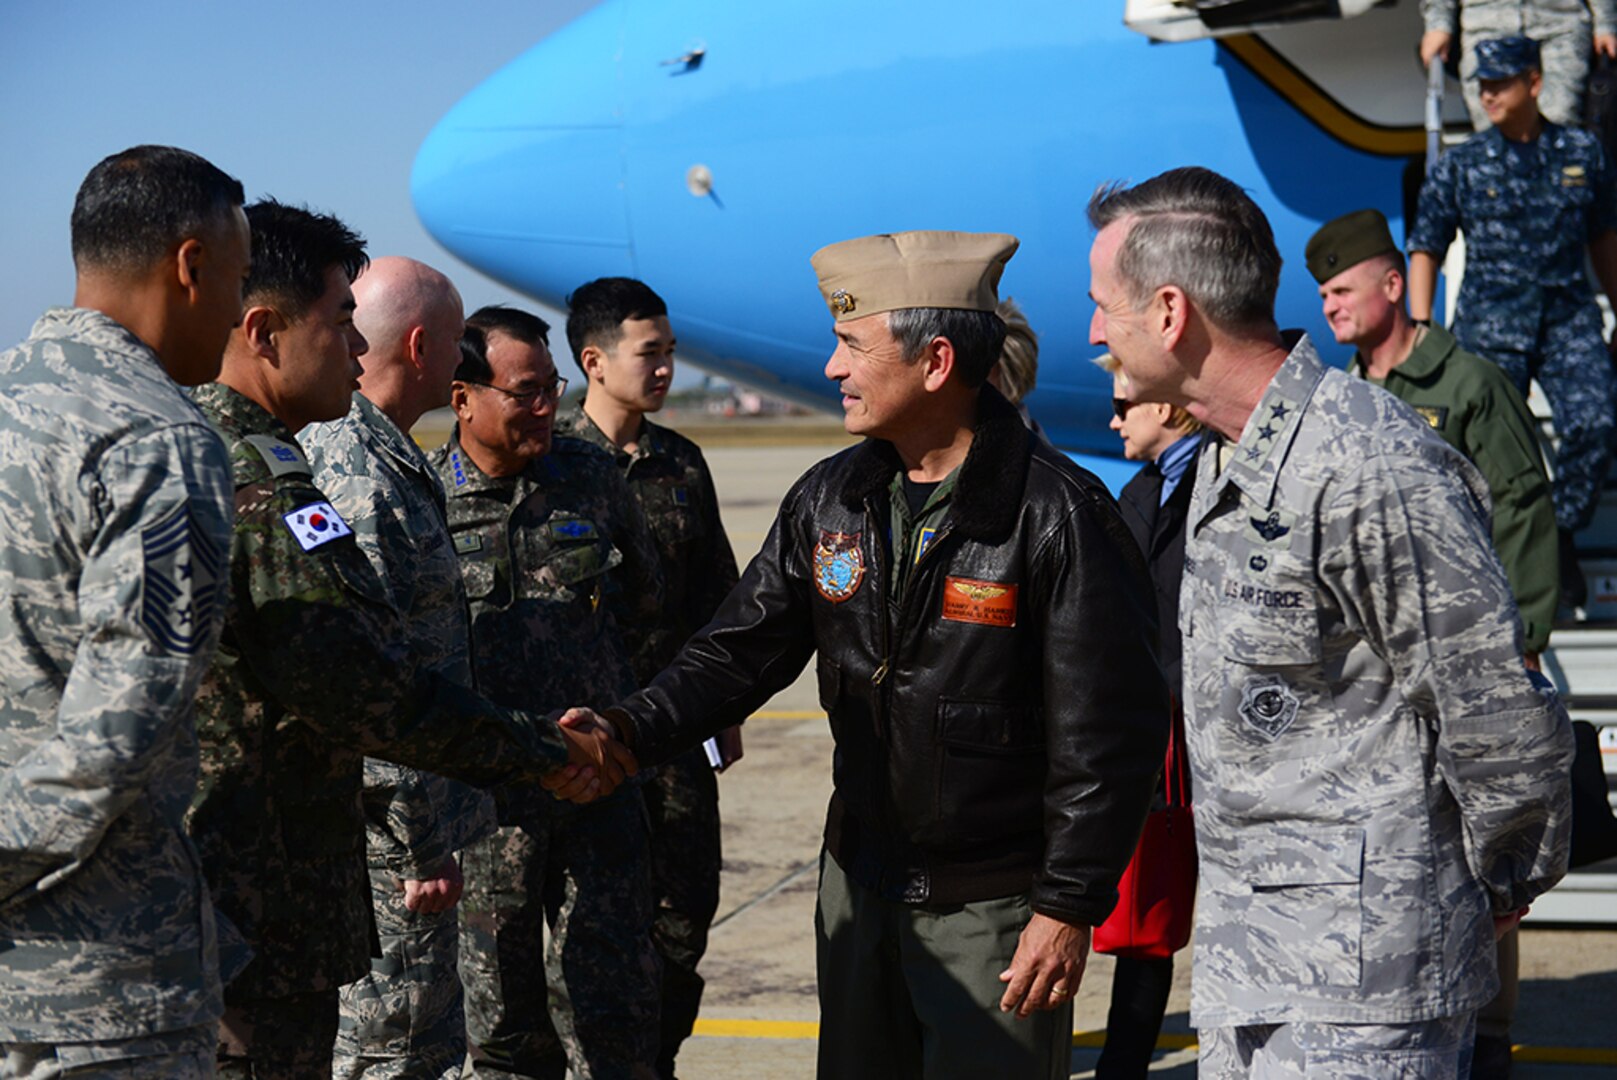 U.S. Navy Adm. Harry B. Harris Jr., U.S. Pacific Command commander, is met by U.S. and ROK senior leaders at Osan Air Base, Republic of Korea, Oct. 31, 2015. During his visit, Harris was individually briefed on the conditions of Osan’s dormitories, before inspecting one himself. In addition to this visit, he attended a series of bilateral, alliance coordination meetings between the ROK and U.S. senior leadership. 